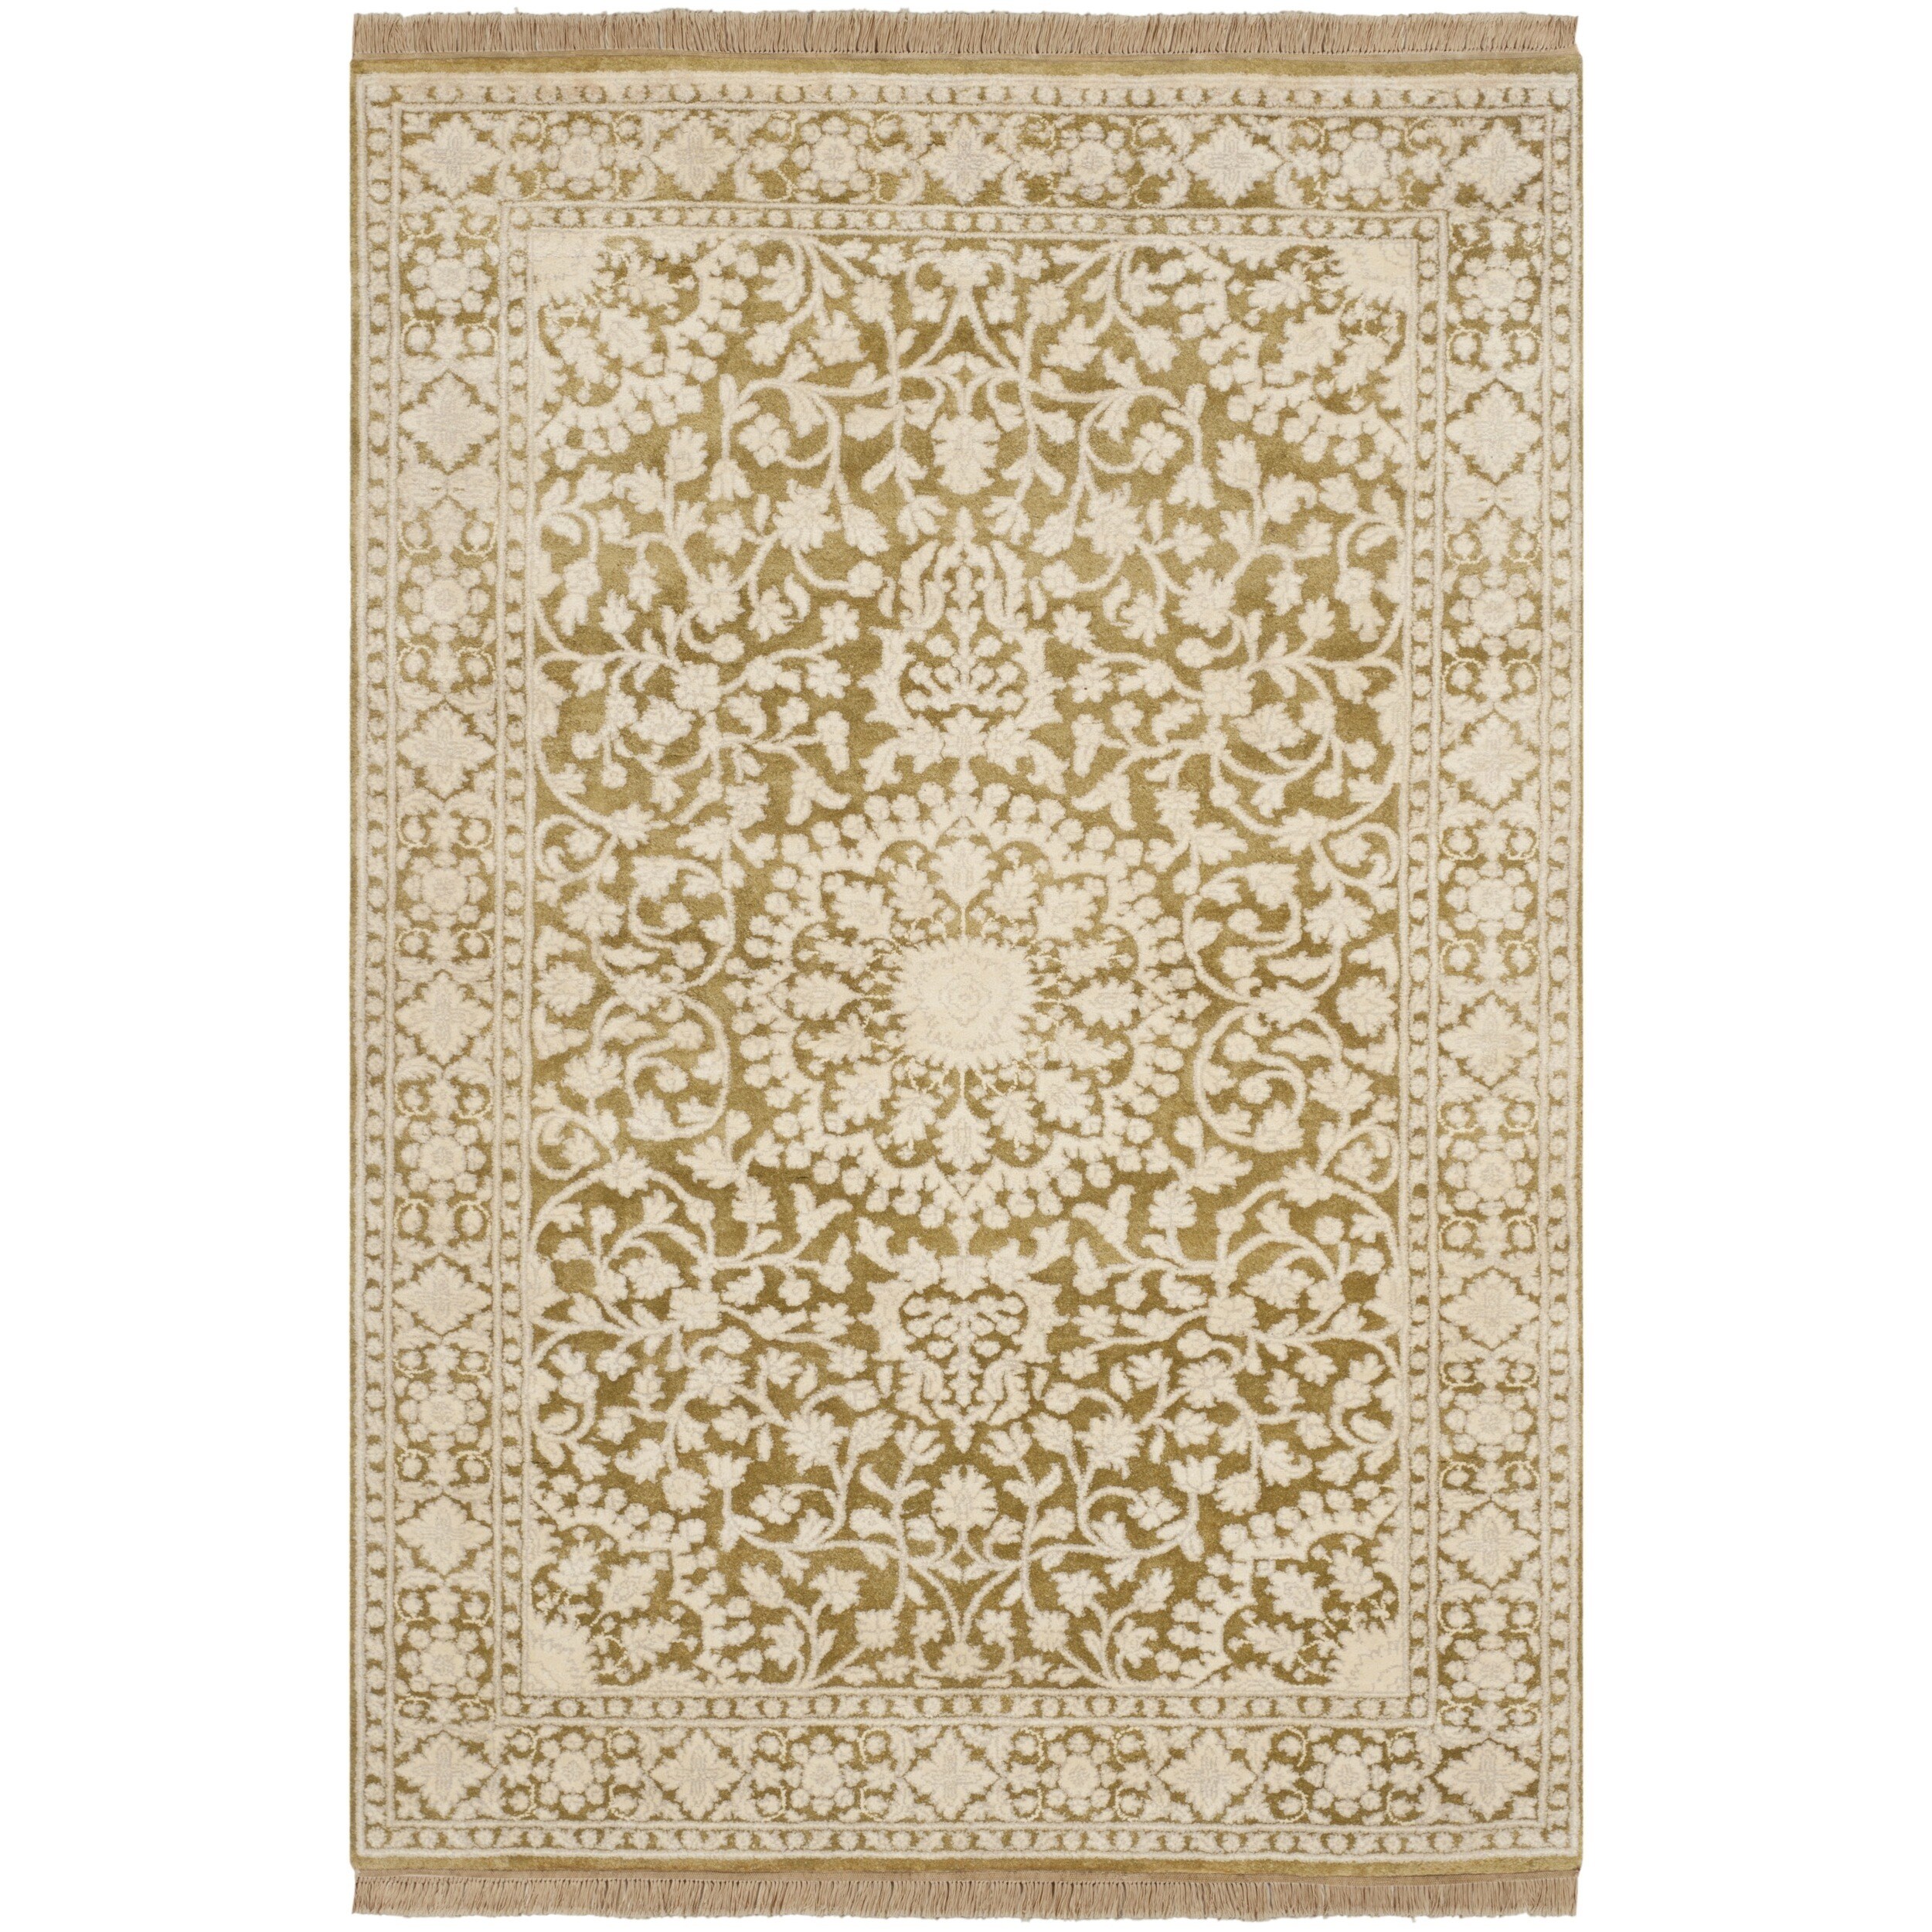 Safavieh Hand knotted Ganges River Ivory/ Green Wool Rug (4 X 6)